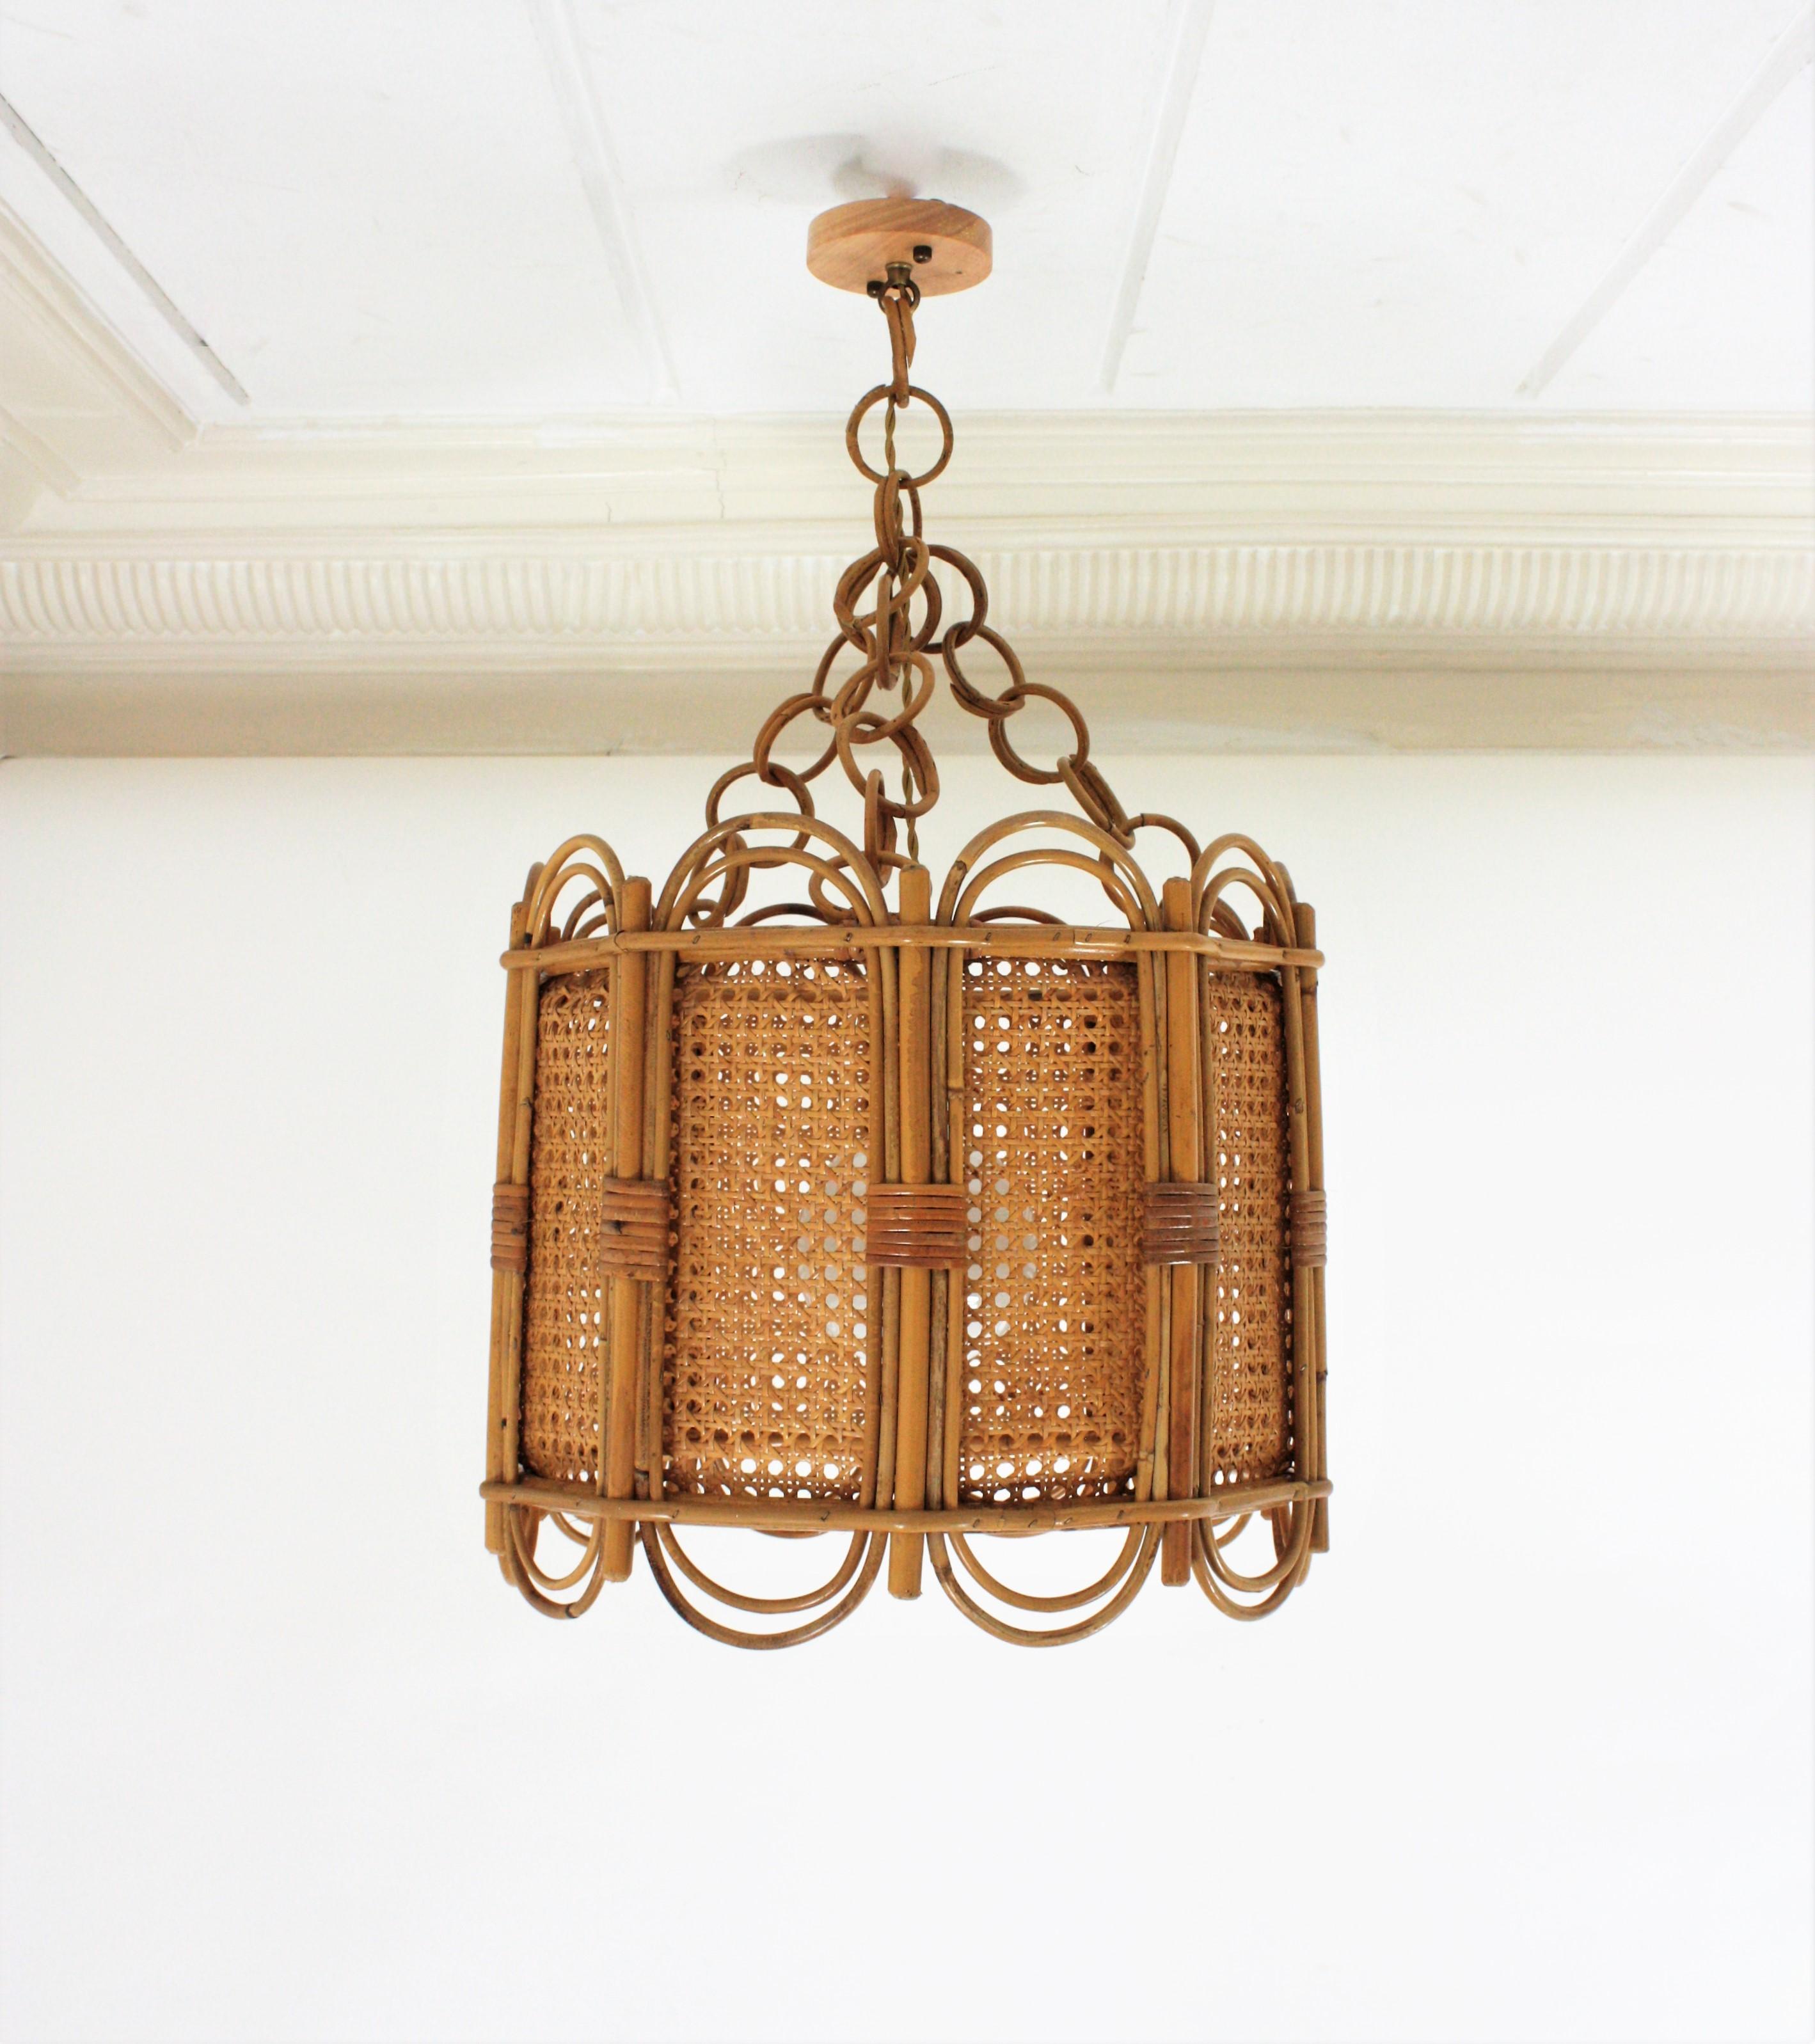 Spanish 1960s Mid-Century Modern rattan and wicker wire pendant lamp or lantern.
This eye-catching suspension lamp features a rattan drum shaped structure with wavy top an bottom and woven wicker panels.
It hangs from a triple chain with rattan